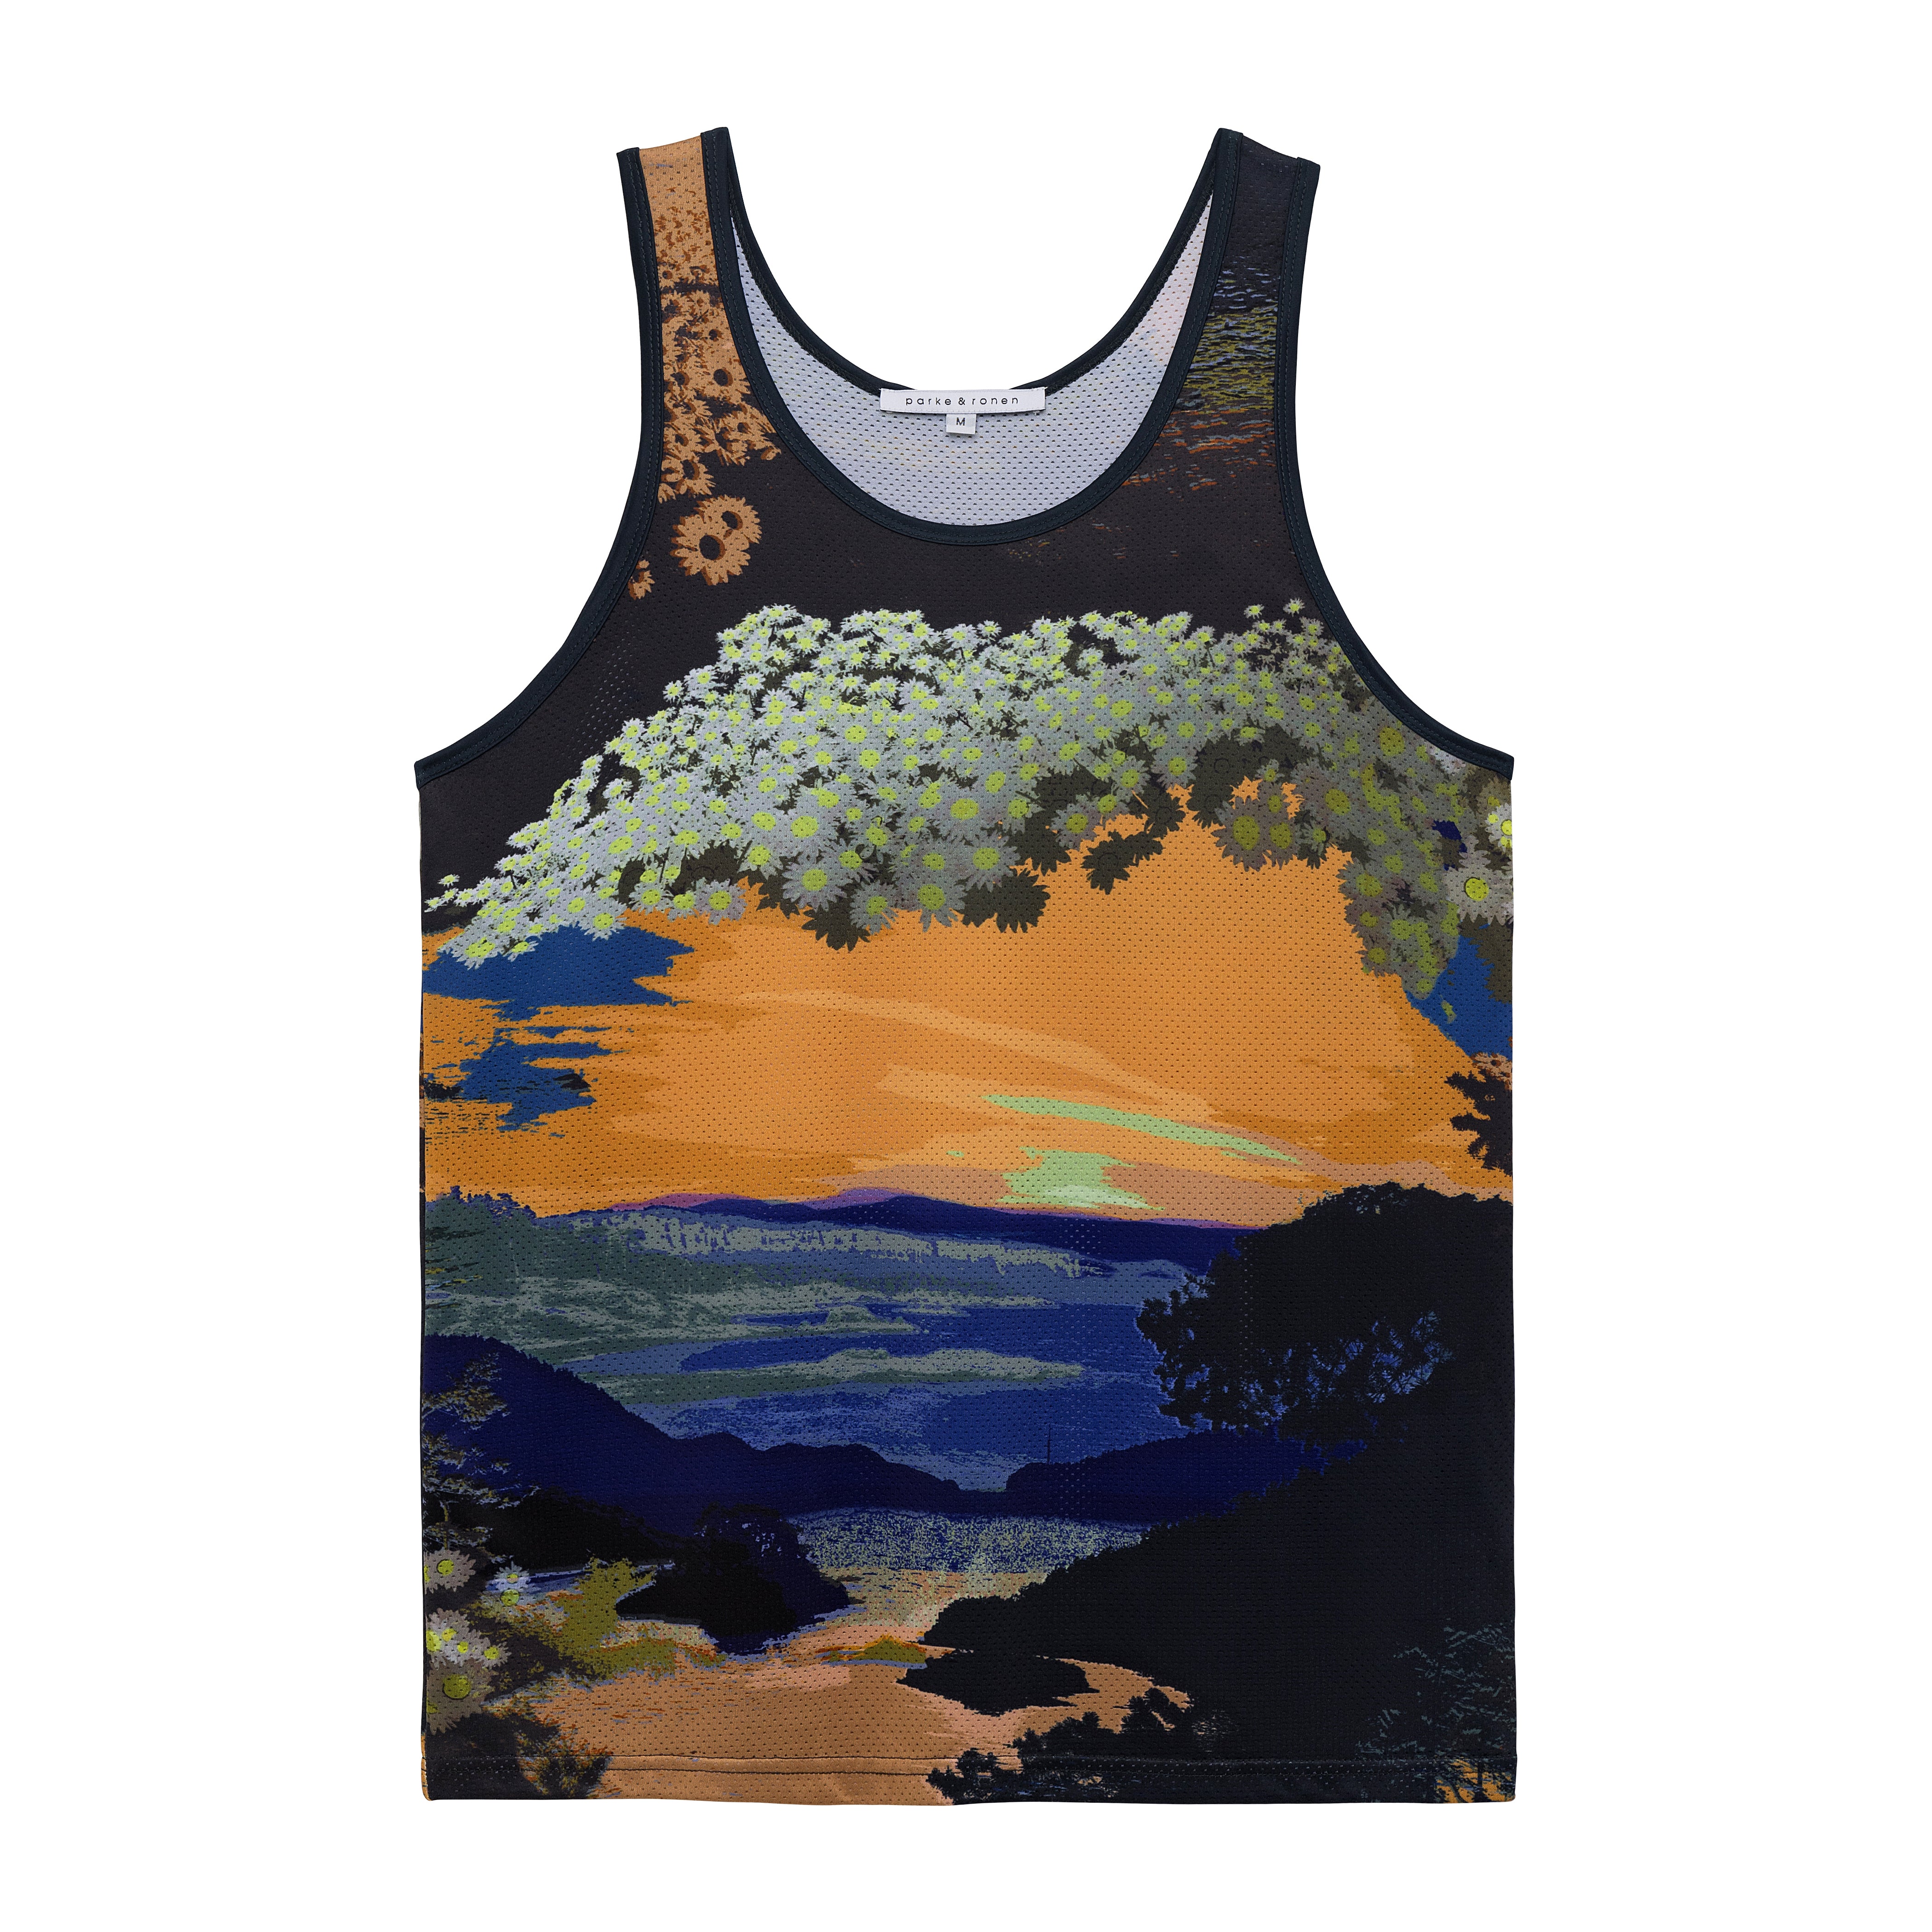 SAVE 70%- Happy Valley Sunset Printed Mesh Tank Top